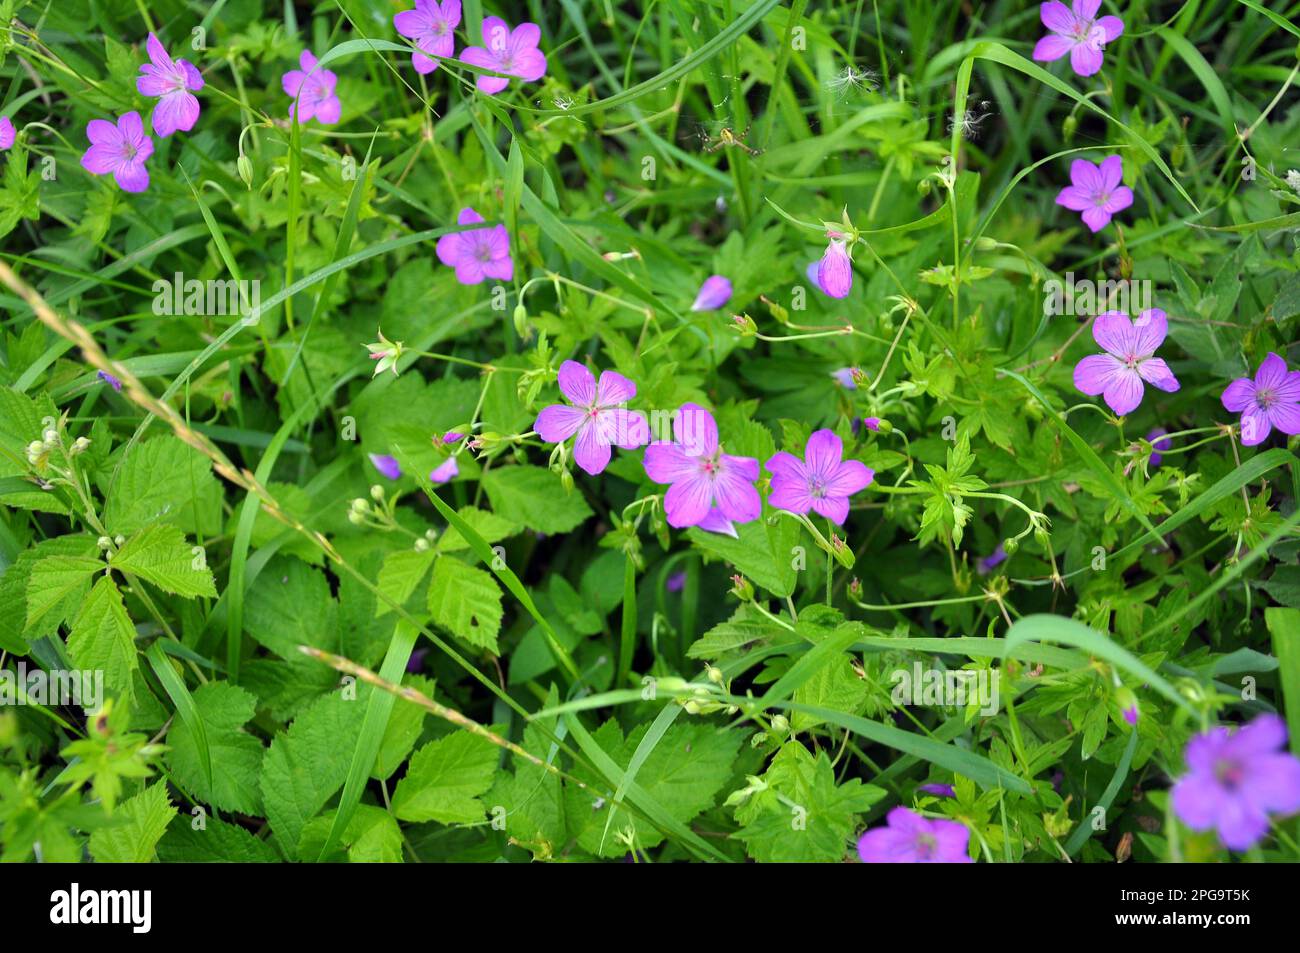 Geranium growing among grasses in the wild Stock Photo